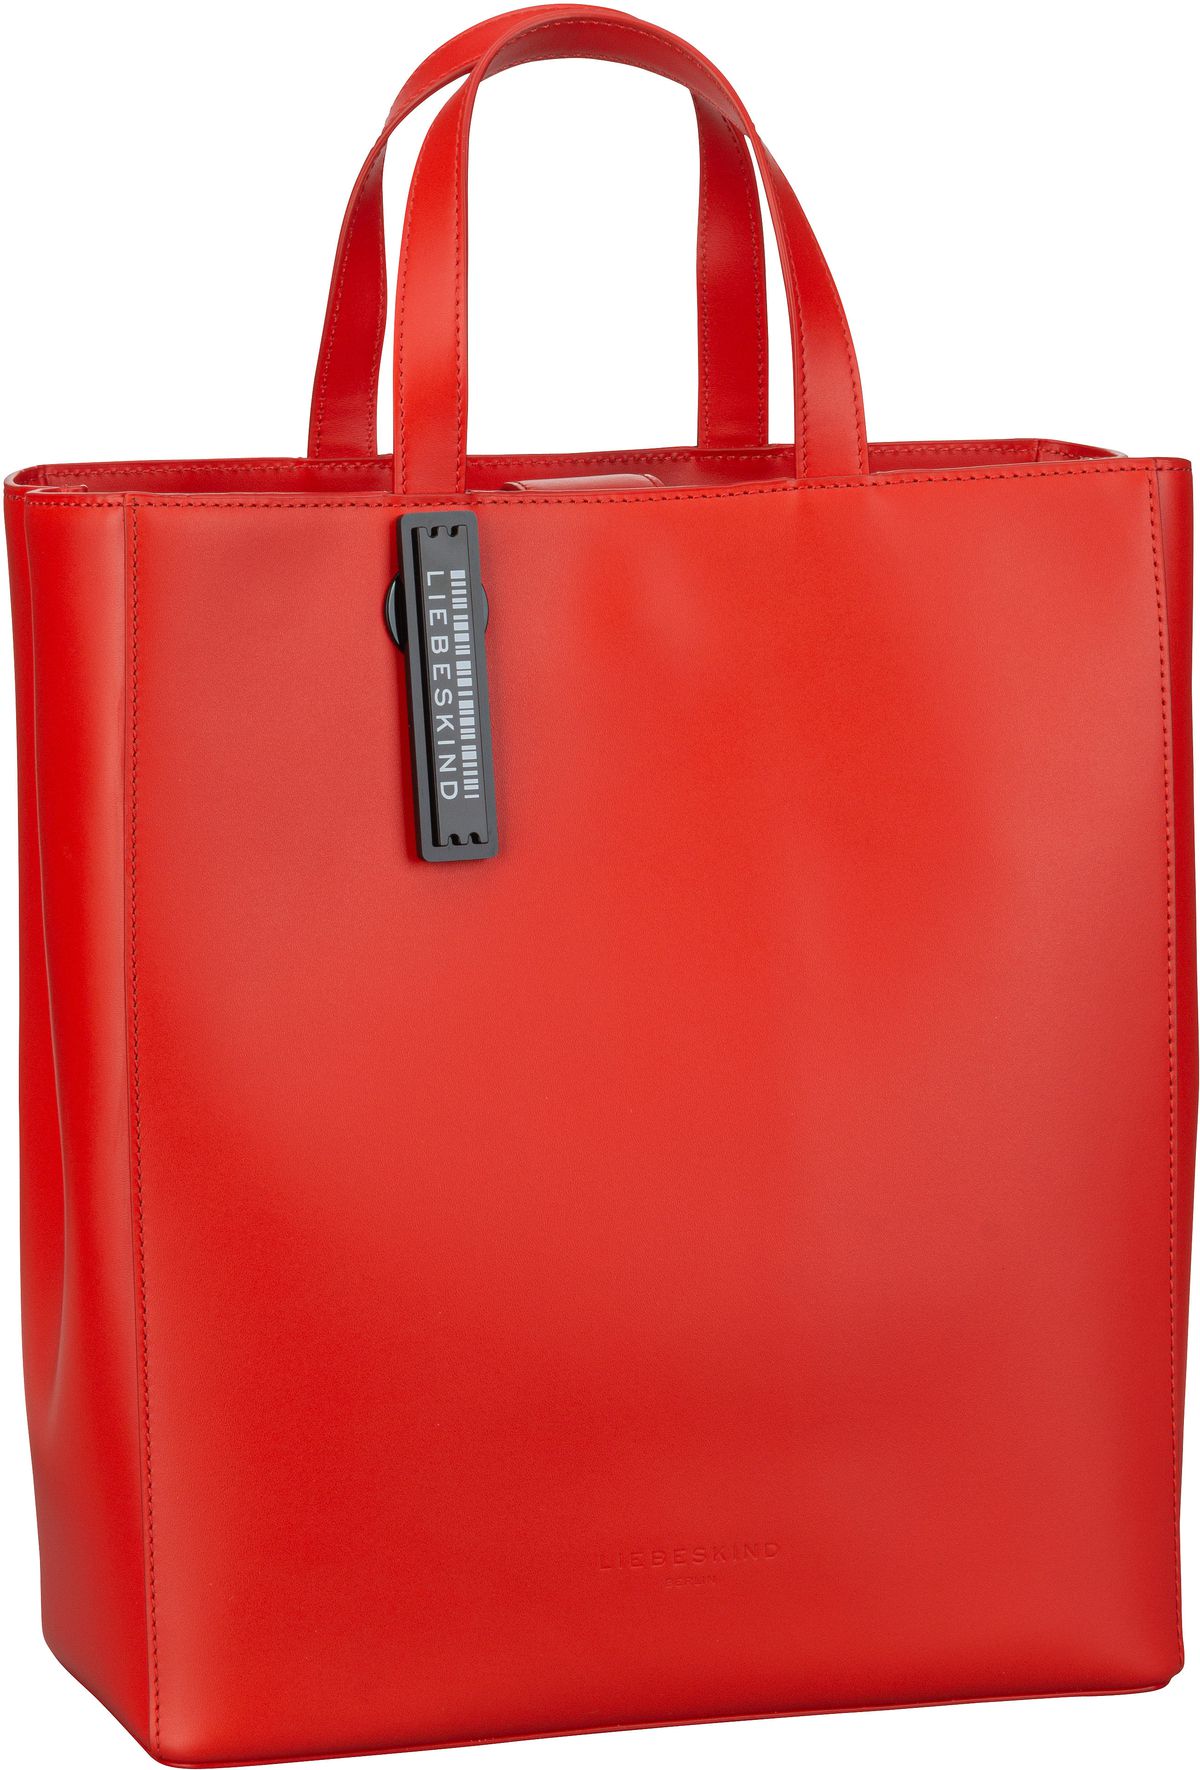 Liebeskind Berlin Paper Bag Tote M - Mexican Peppers